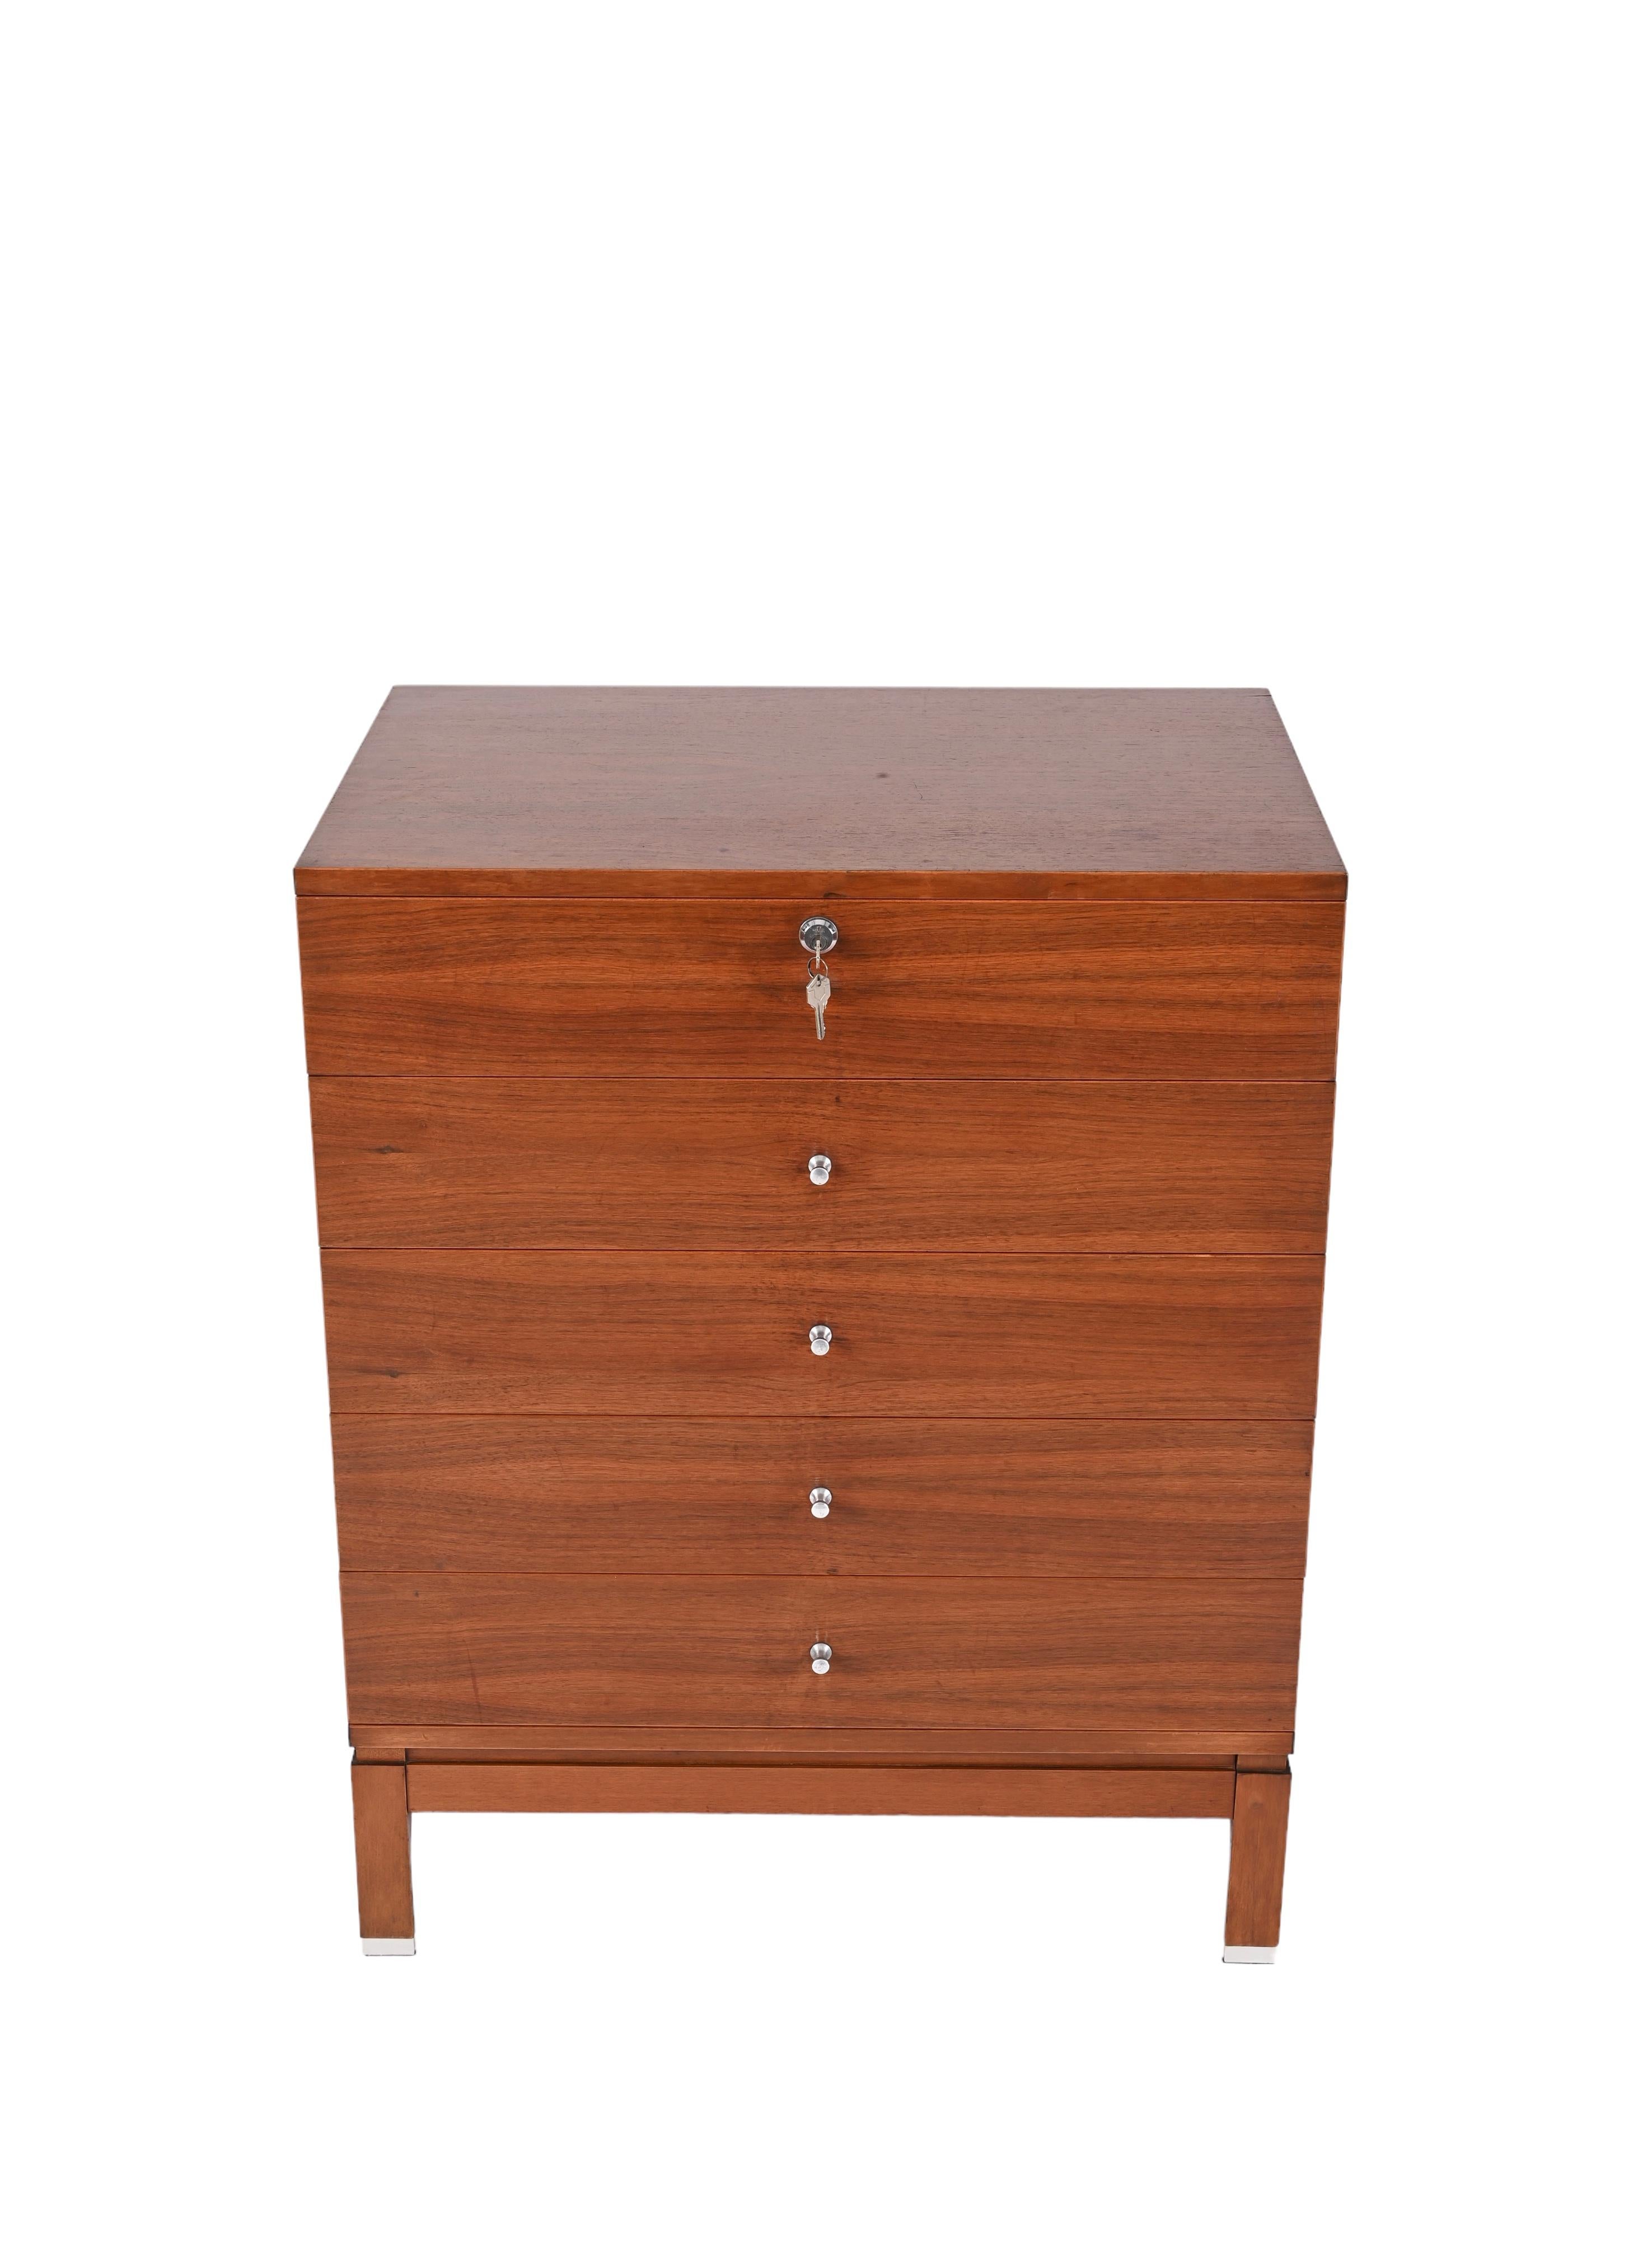 20th Century Mid-Century Chest of Drawers in Walnut by Ico Parisi for MIM Roma, Italy 1960s For Sale